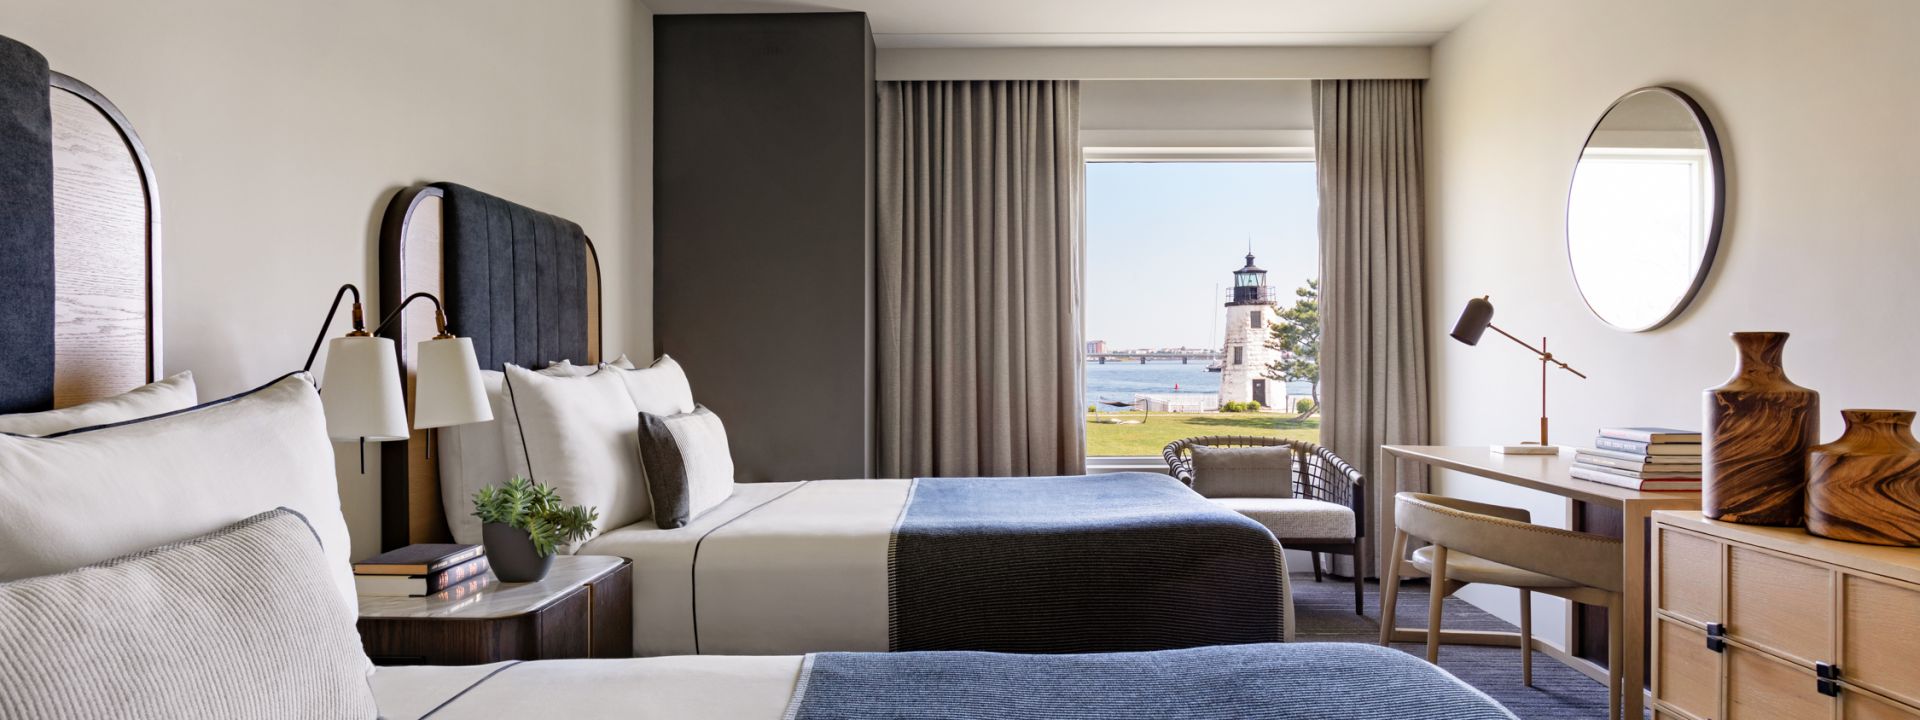 An accessible hotel room with two double beds and a waterfront view.